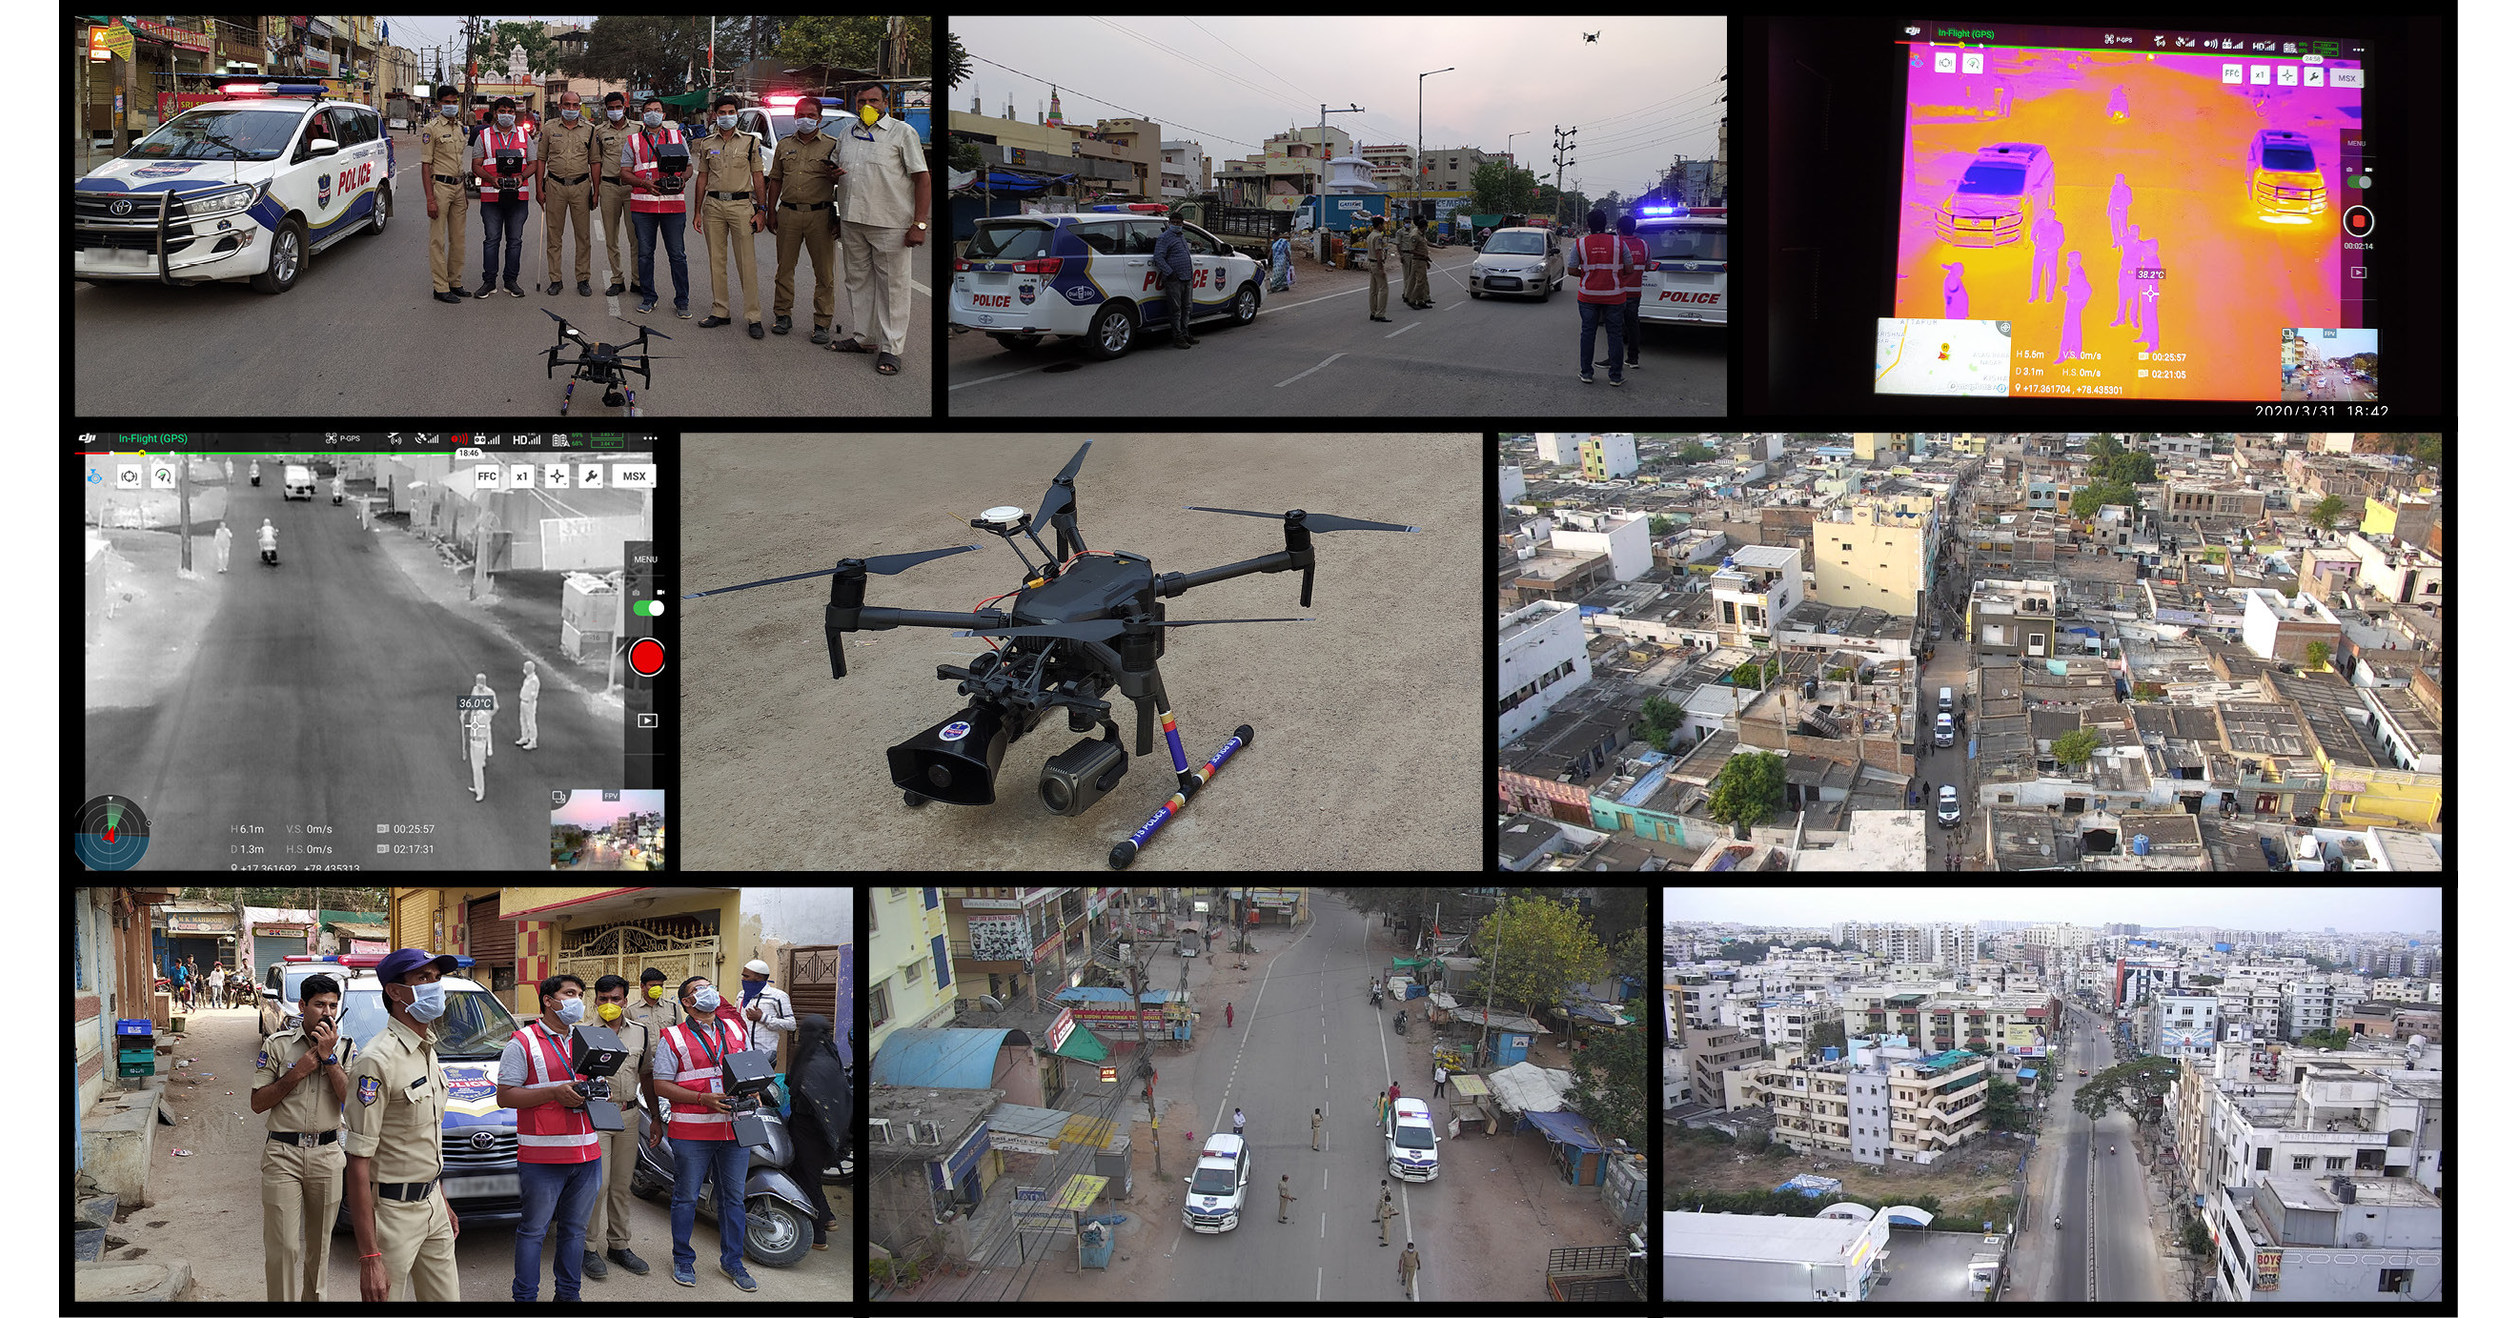 Cyient Provides Drone Based Surveillance Technology To Support Cyberabad Police In Implementing Covid 19 Lockdown